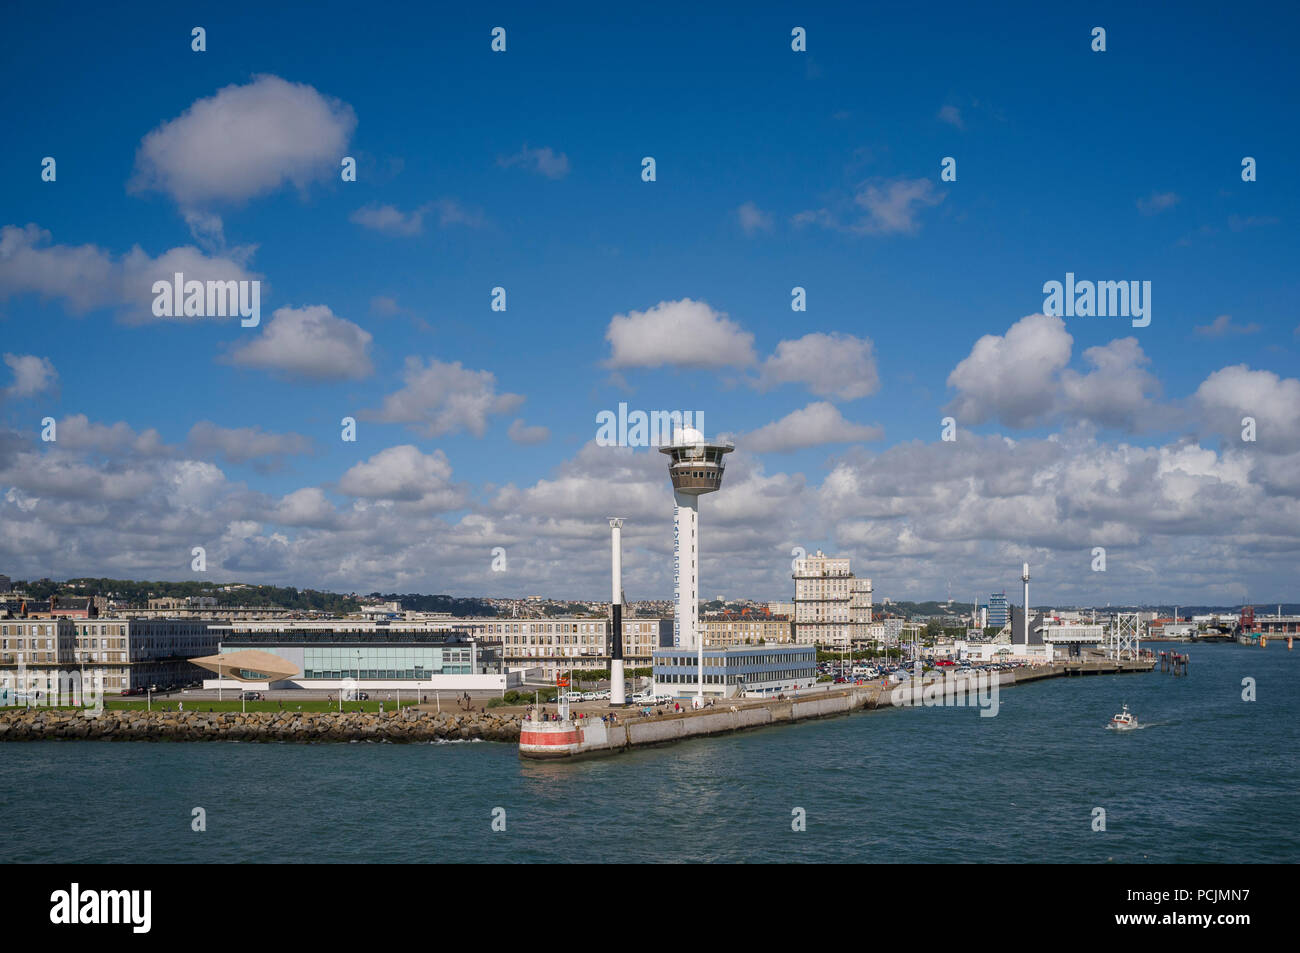 View of Le Havre from the sea showing the Musee Malraux and iconic apartments by Auguste Perret with blue sky and fluffy white cumulus clouds Stock Photo